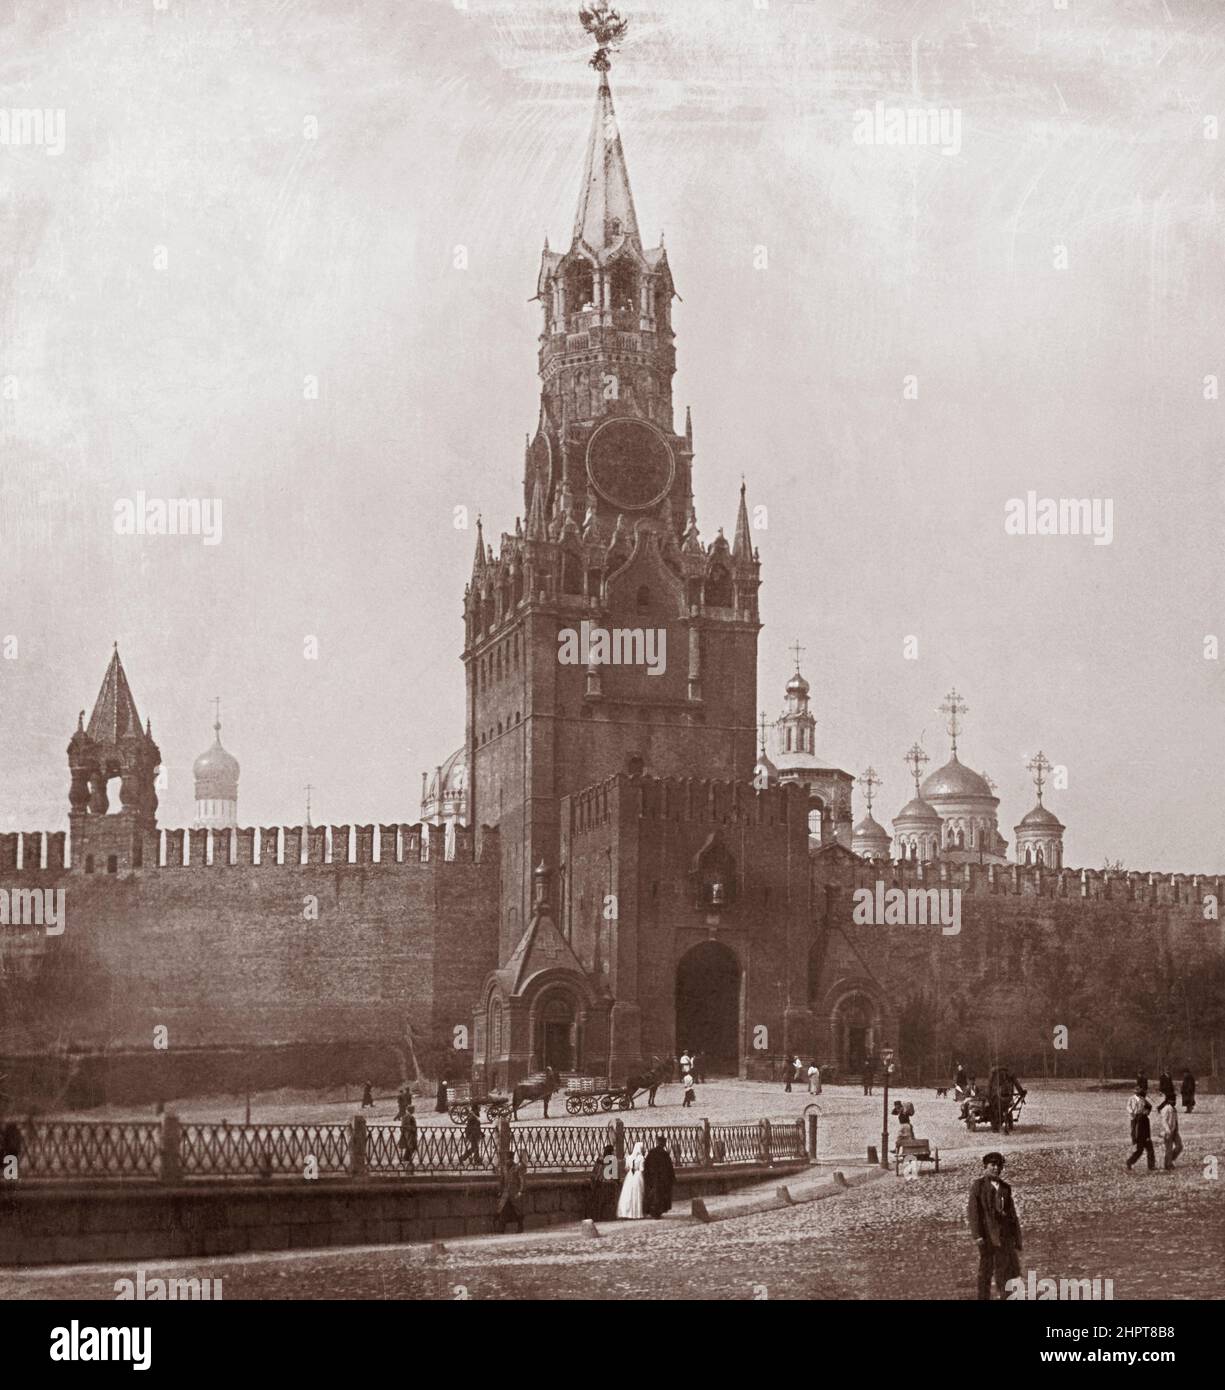 Vintage photo of Spasskaya Tower in Moscow Kremlin (with chapels of the 'Great Council Angel' and 'Great Council Revelation'). Russian Empire. 1905 Th Stock Photo